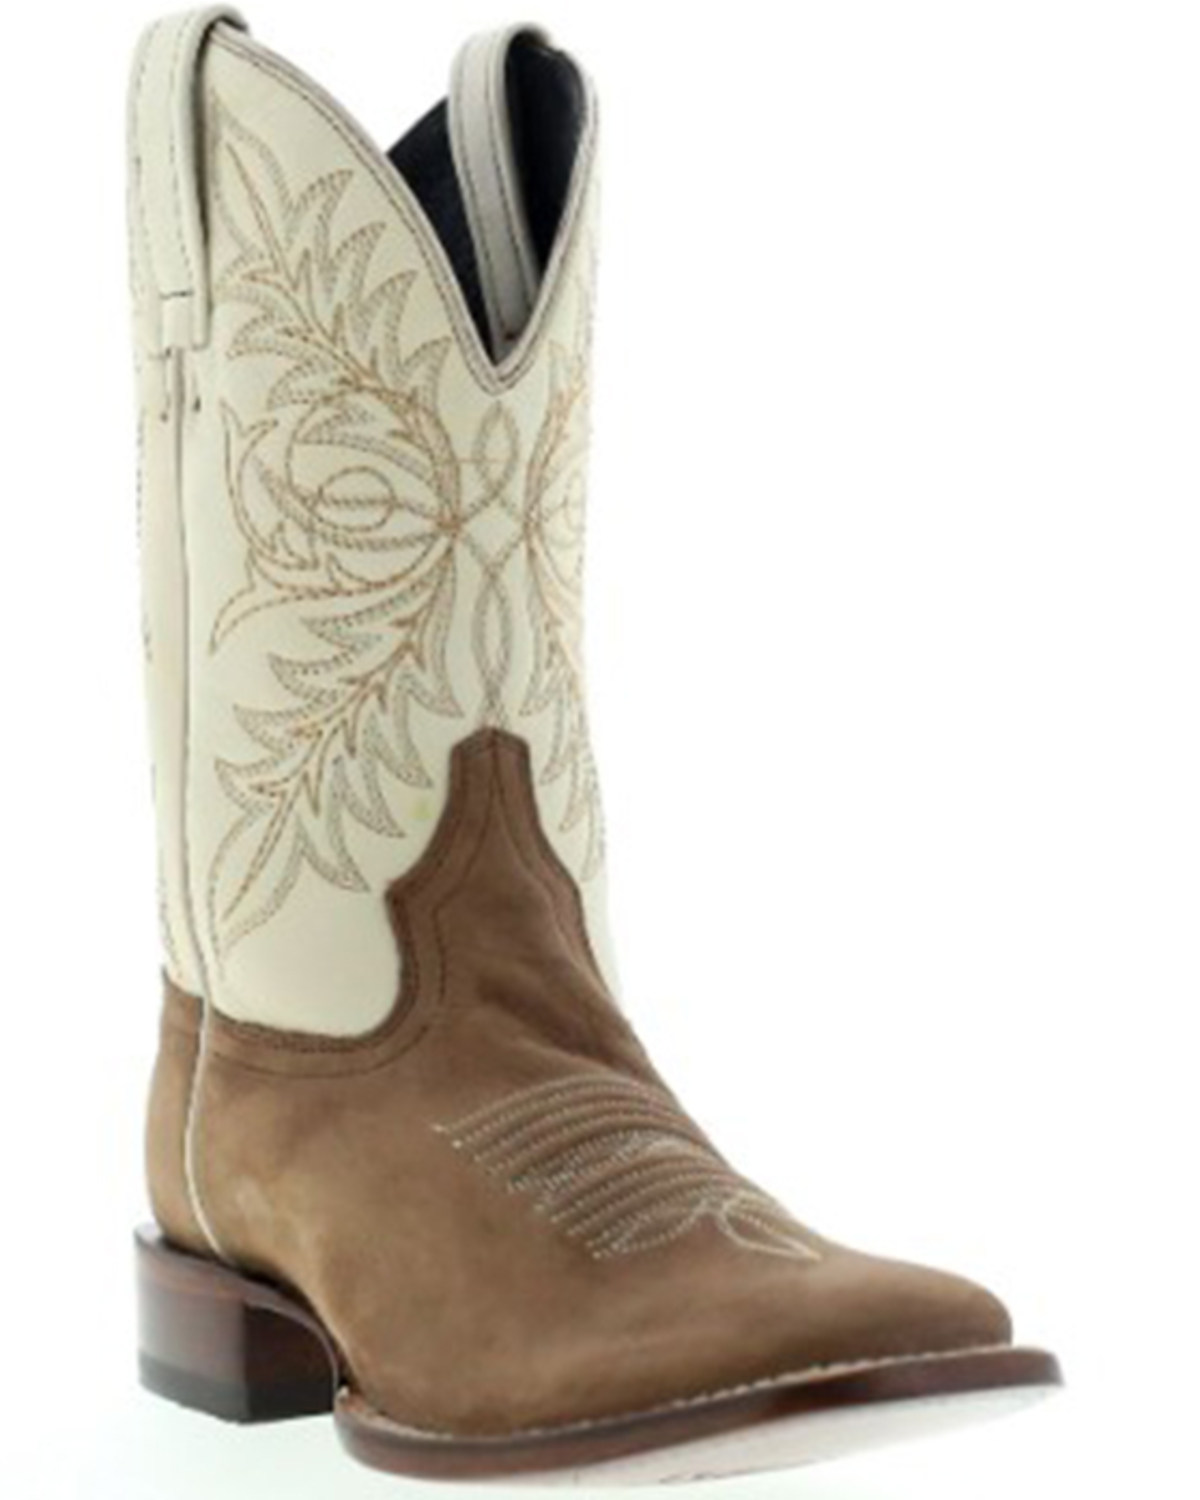 Botas Caborca For Liberty Black Women's Embroidered Leaf Western Boot